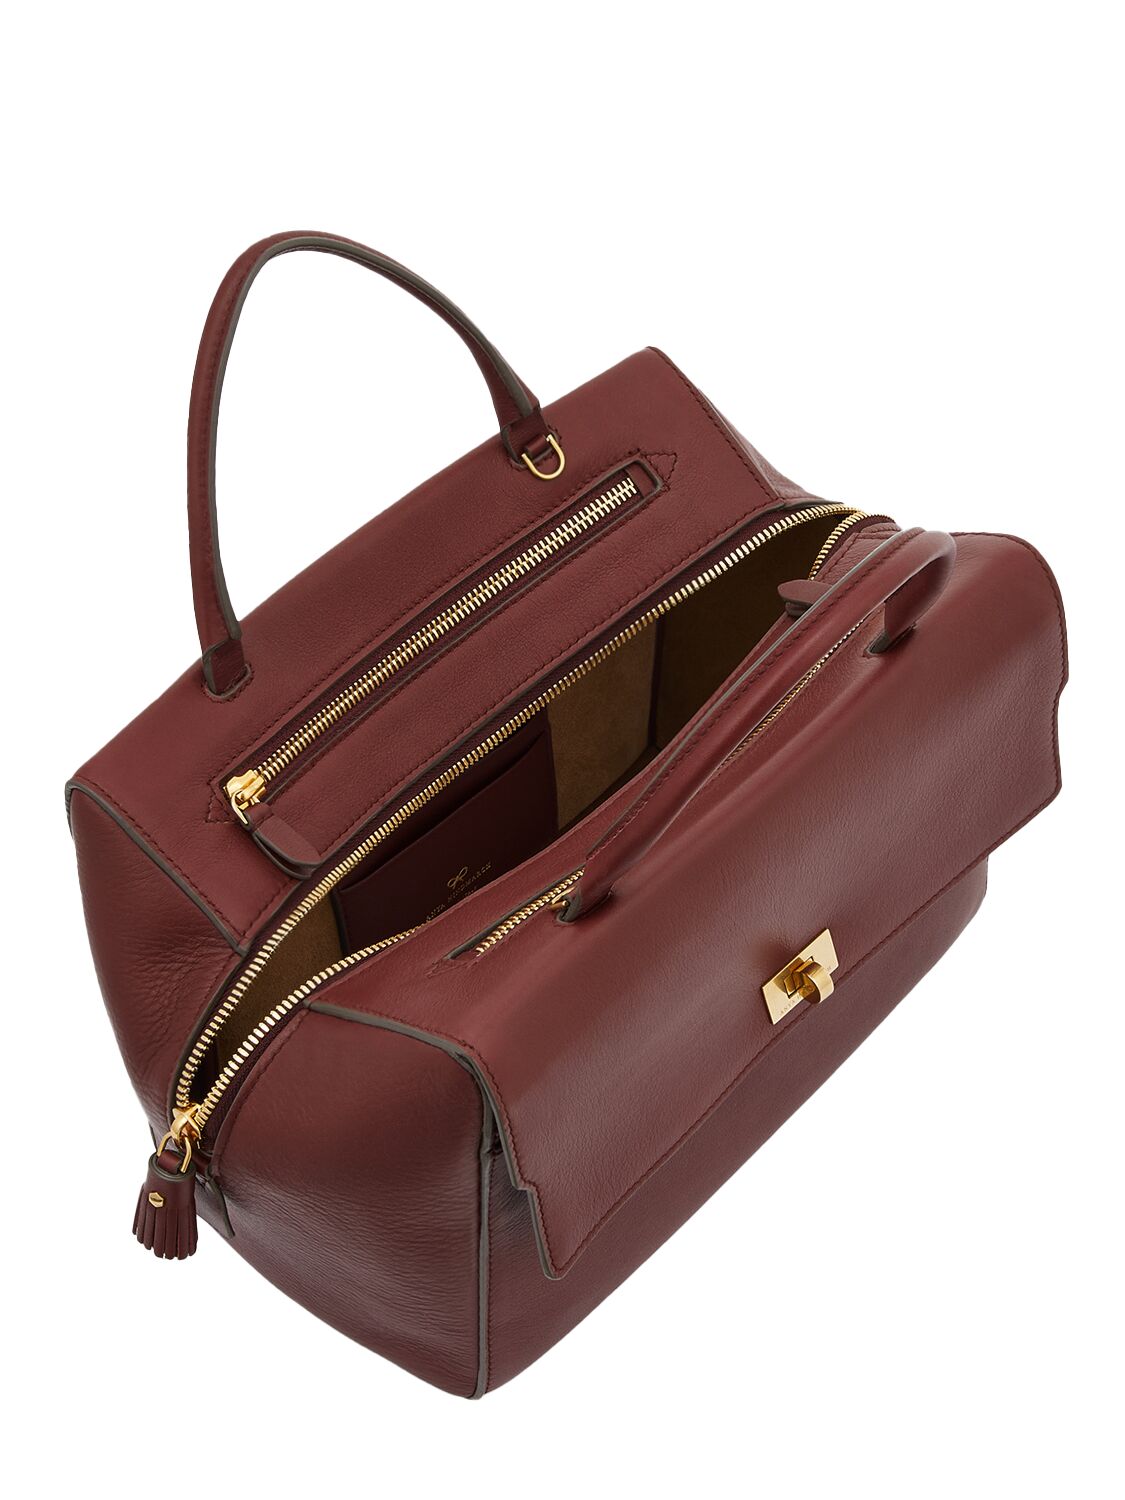 Shop Anya Hindmarch Seaton Leather Tote Bag In Rosewood